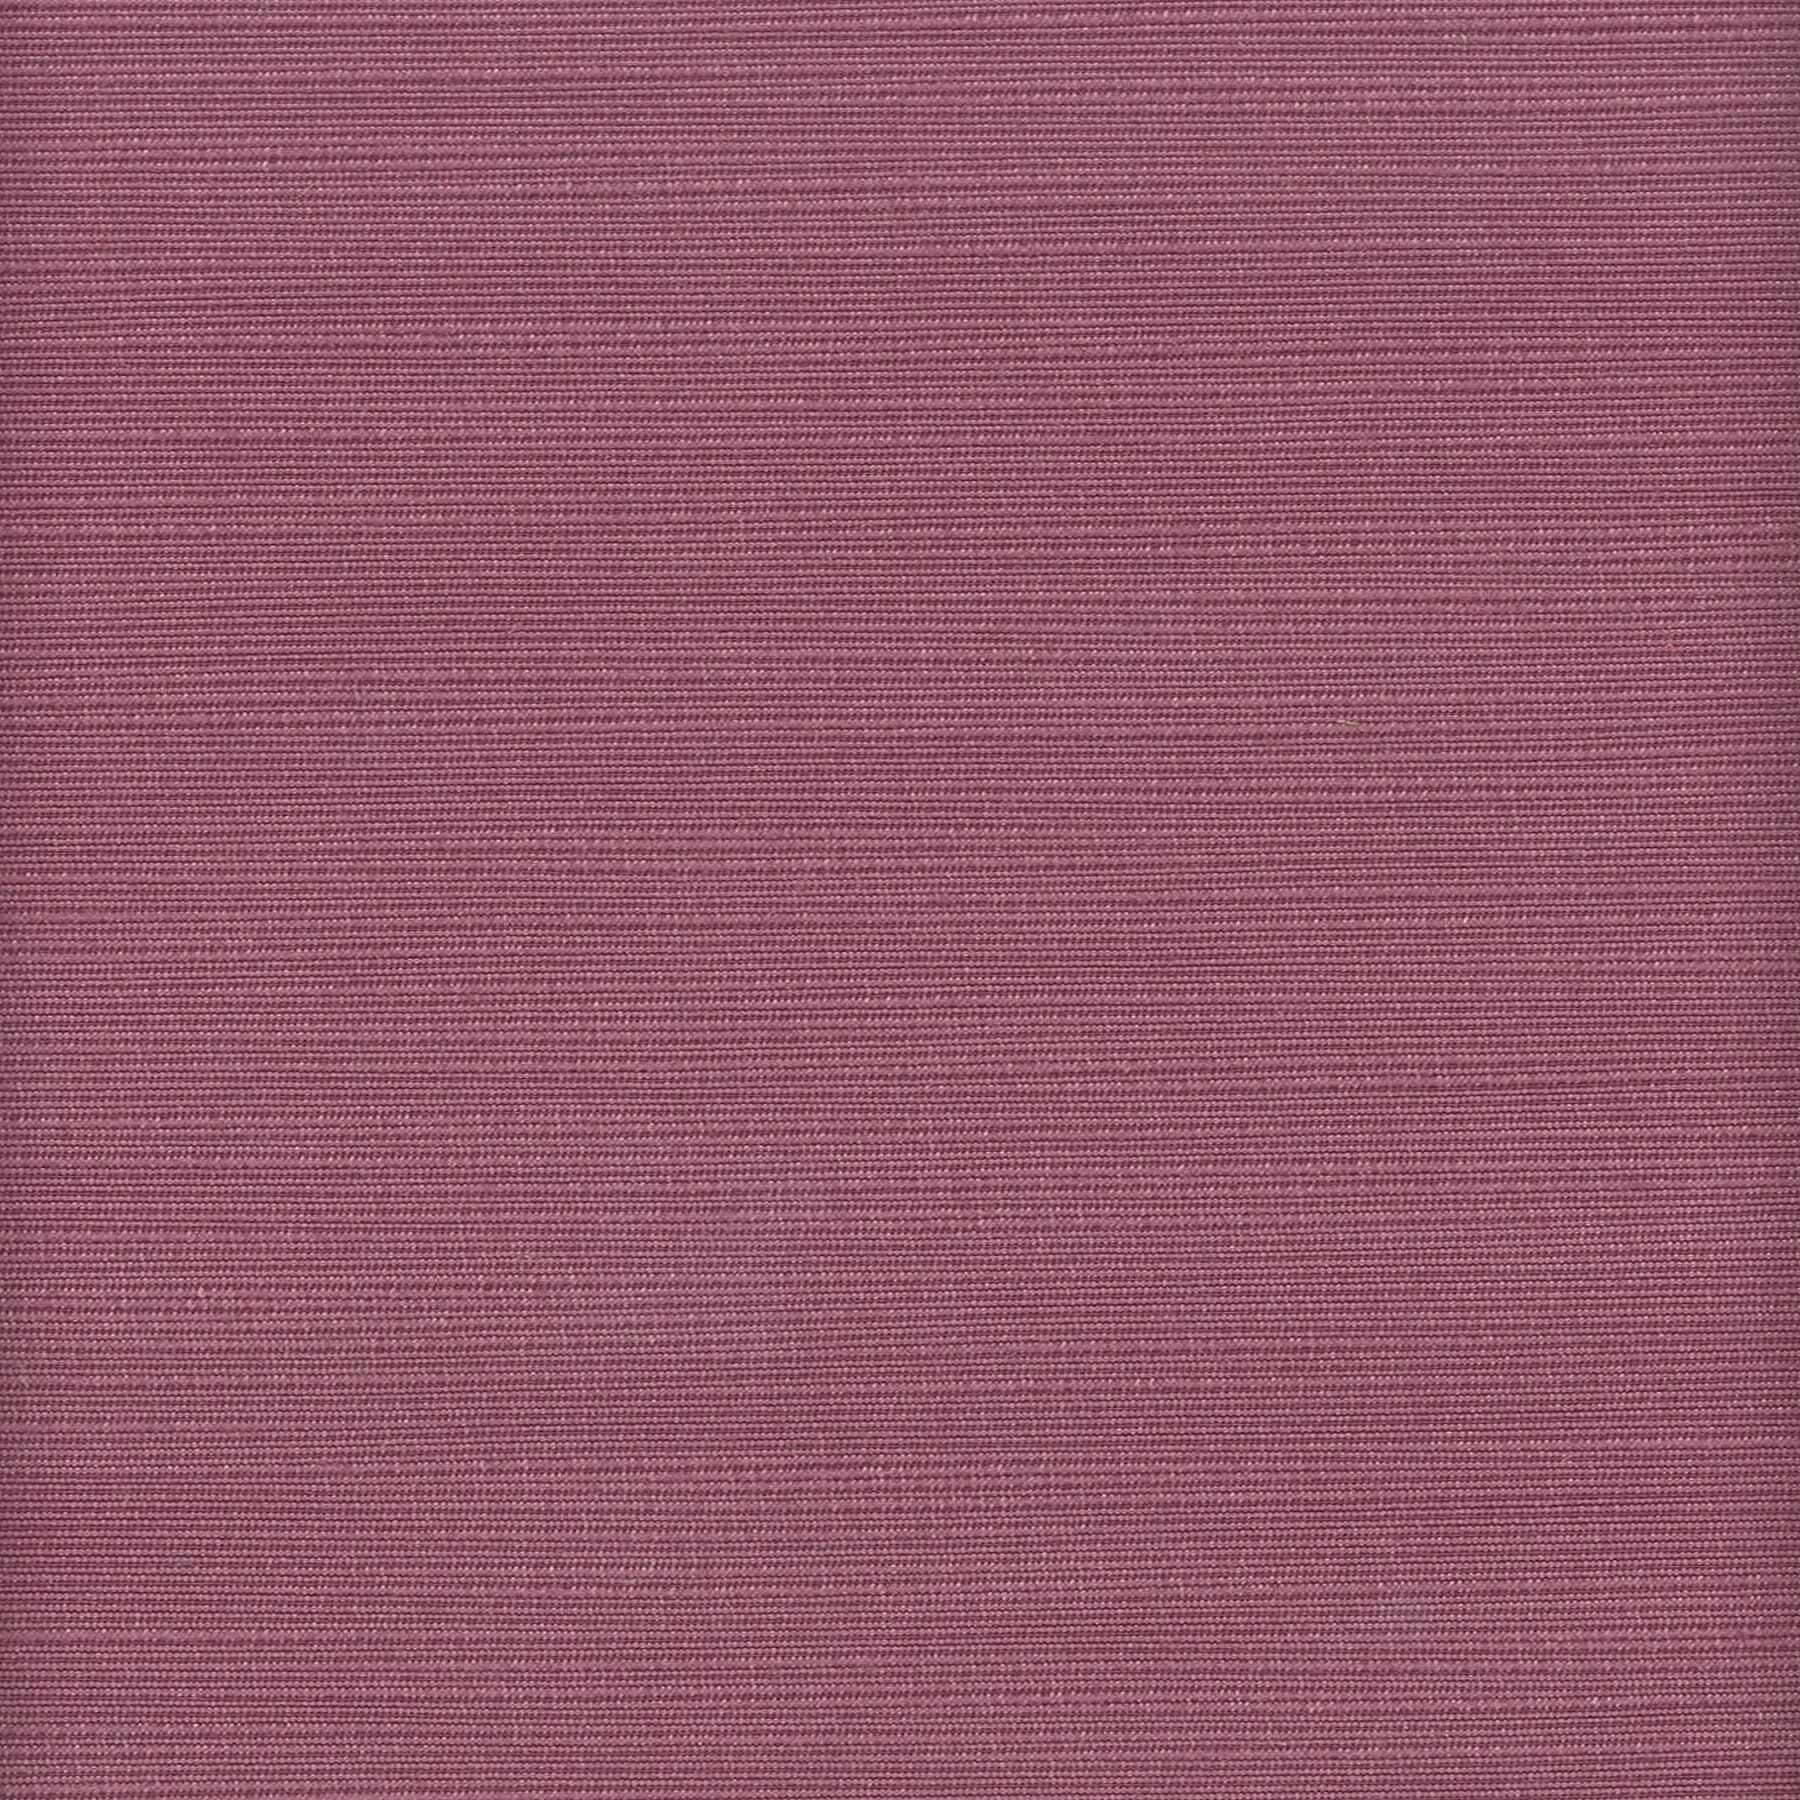 Admire 19 Purple by Stout Fabric